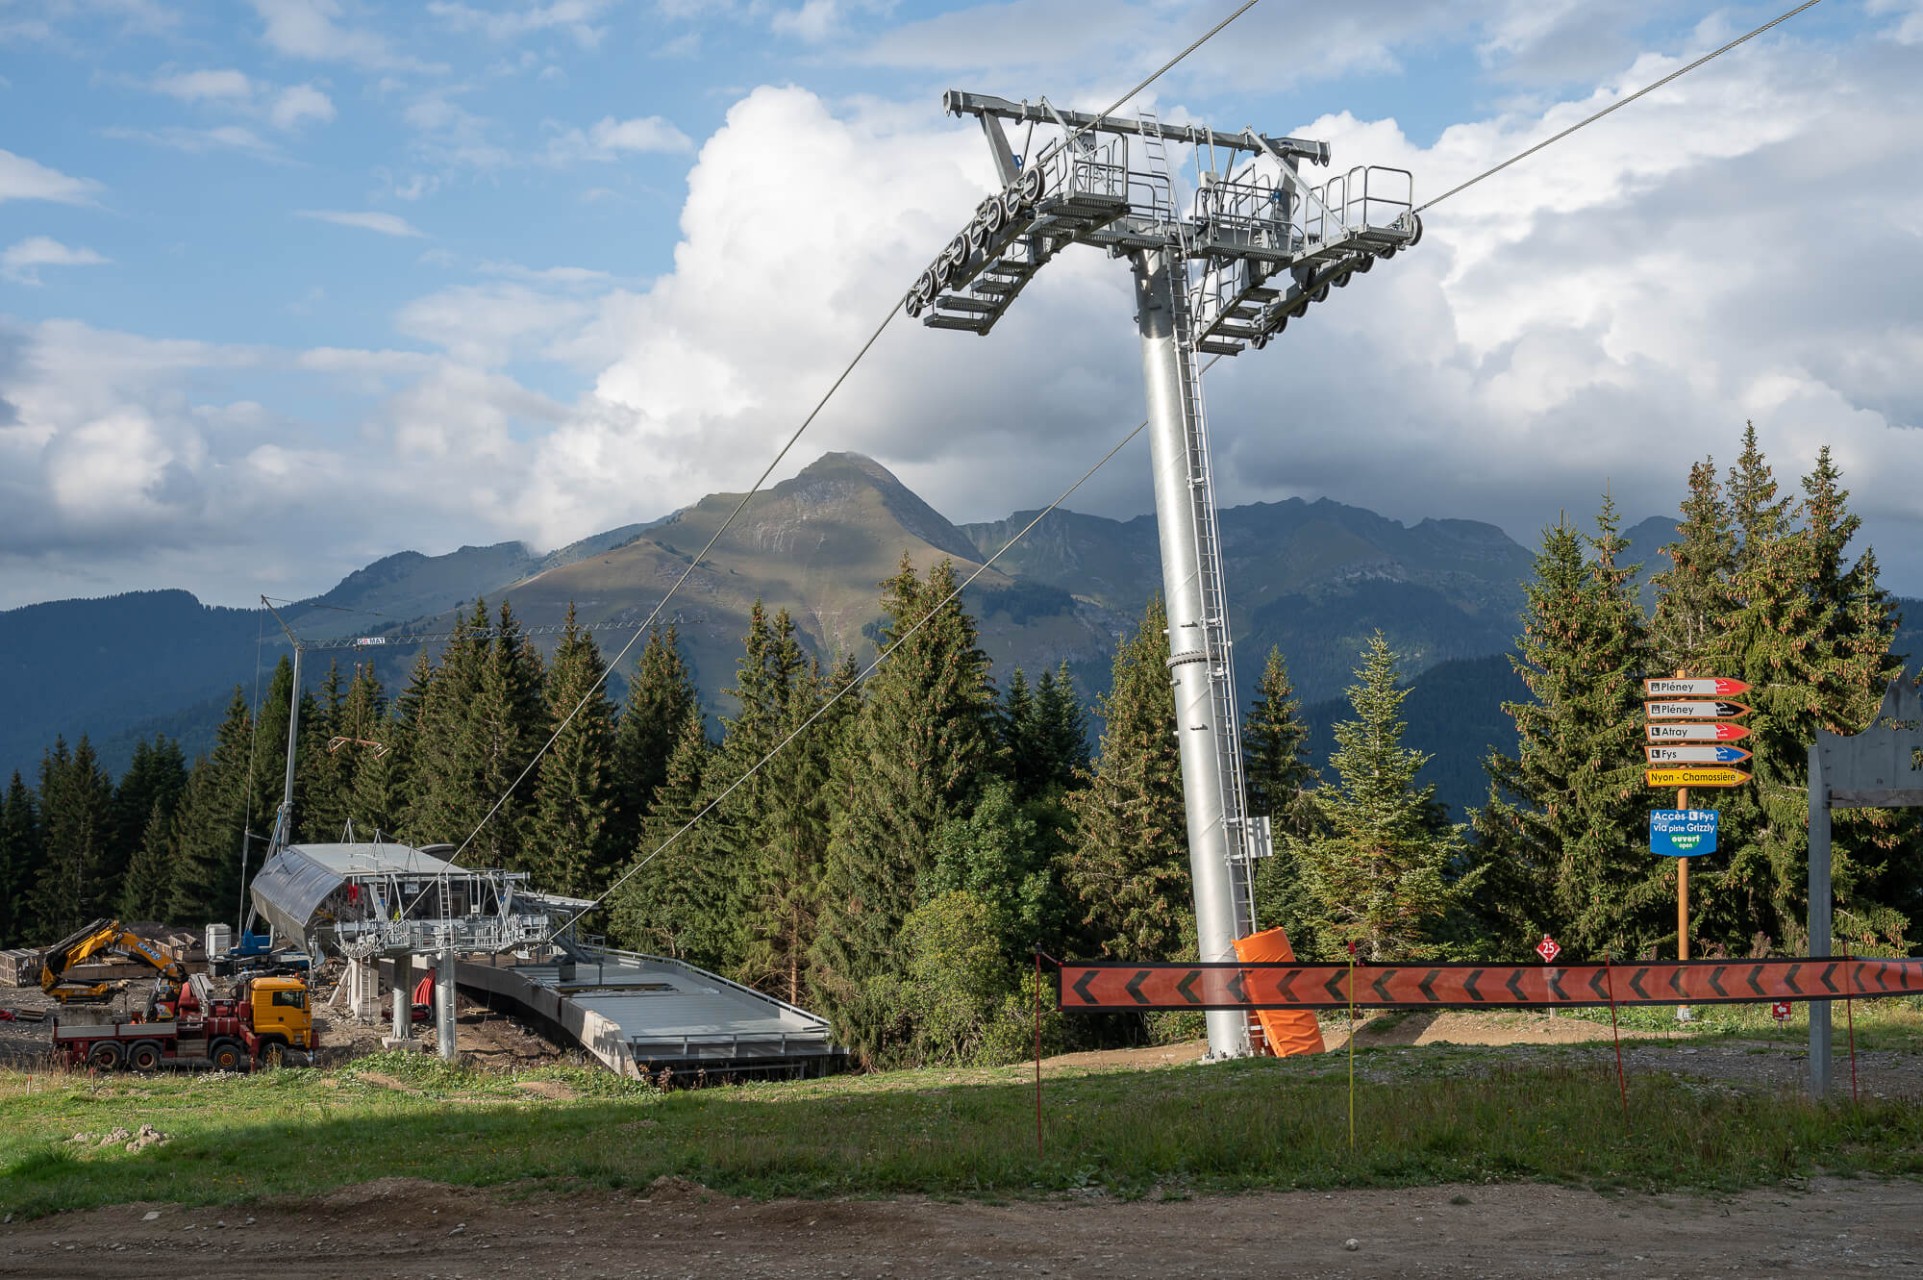 Les Gets-Morzine : The Belvédère chairlift is getting a facelift!